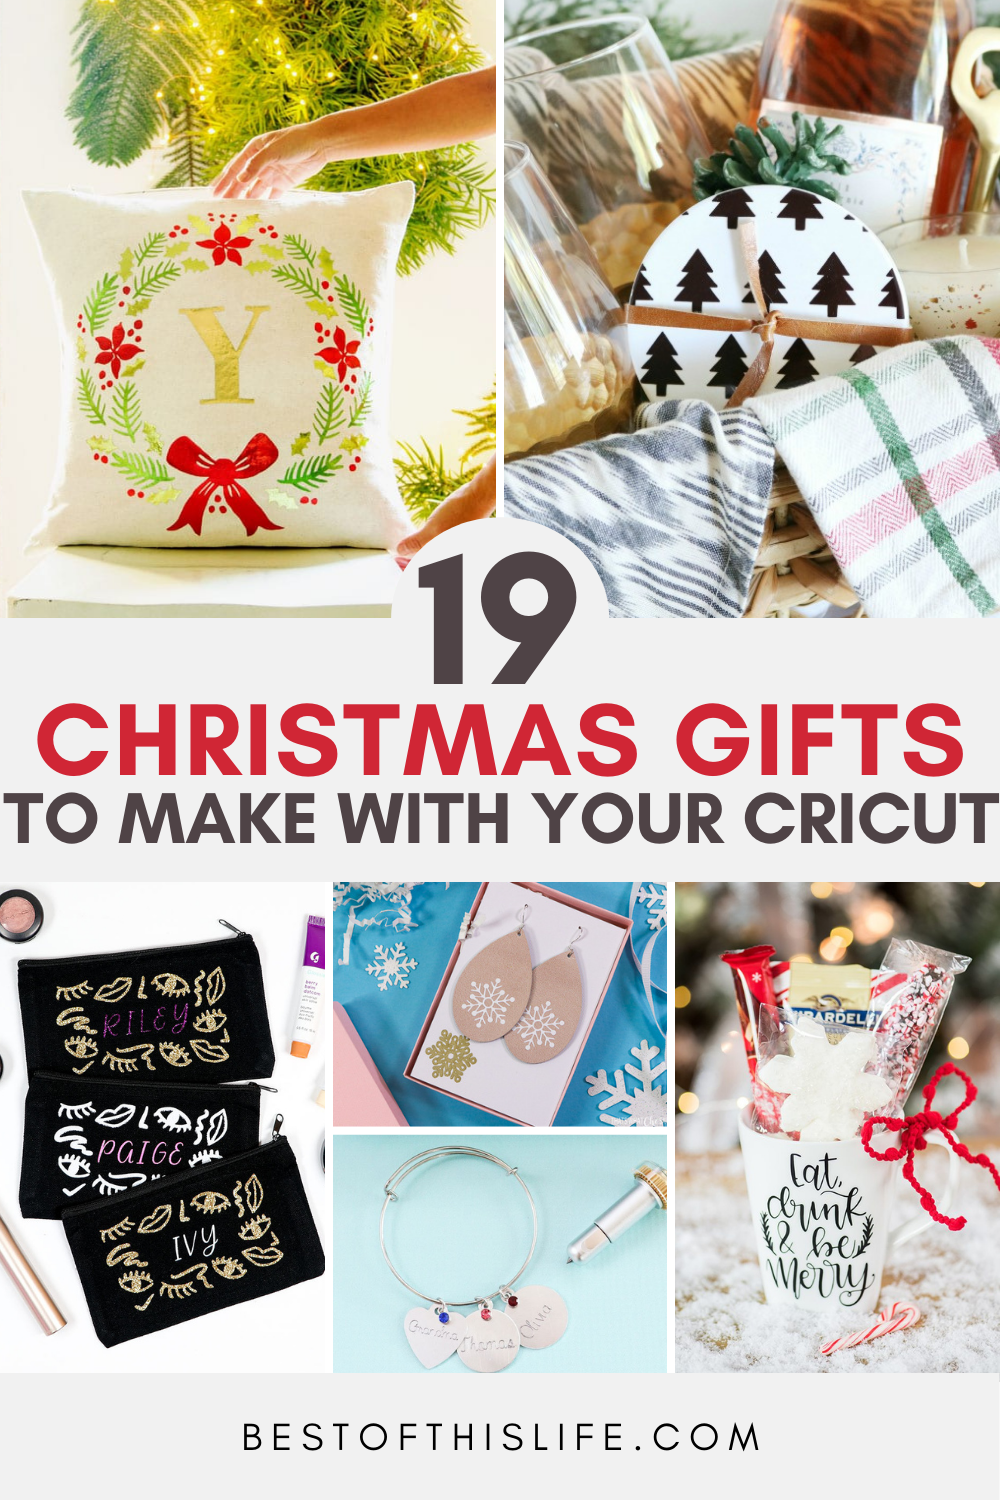 The Best Cricut Gift Ideas for Crafters - Happiness is Homemade